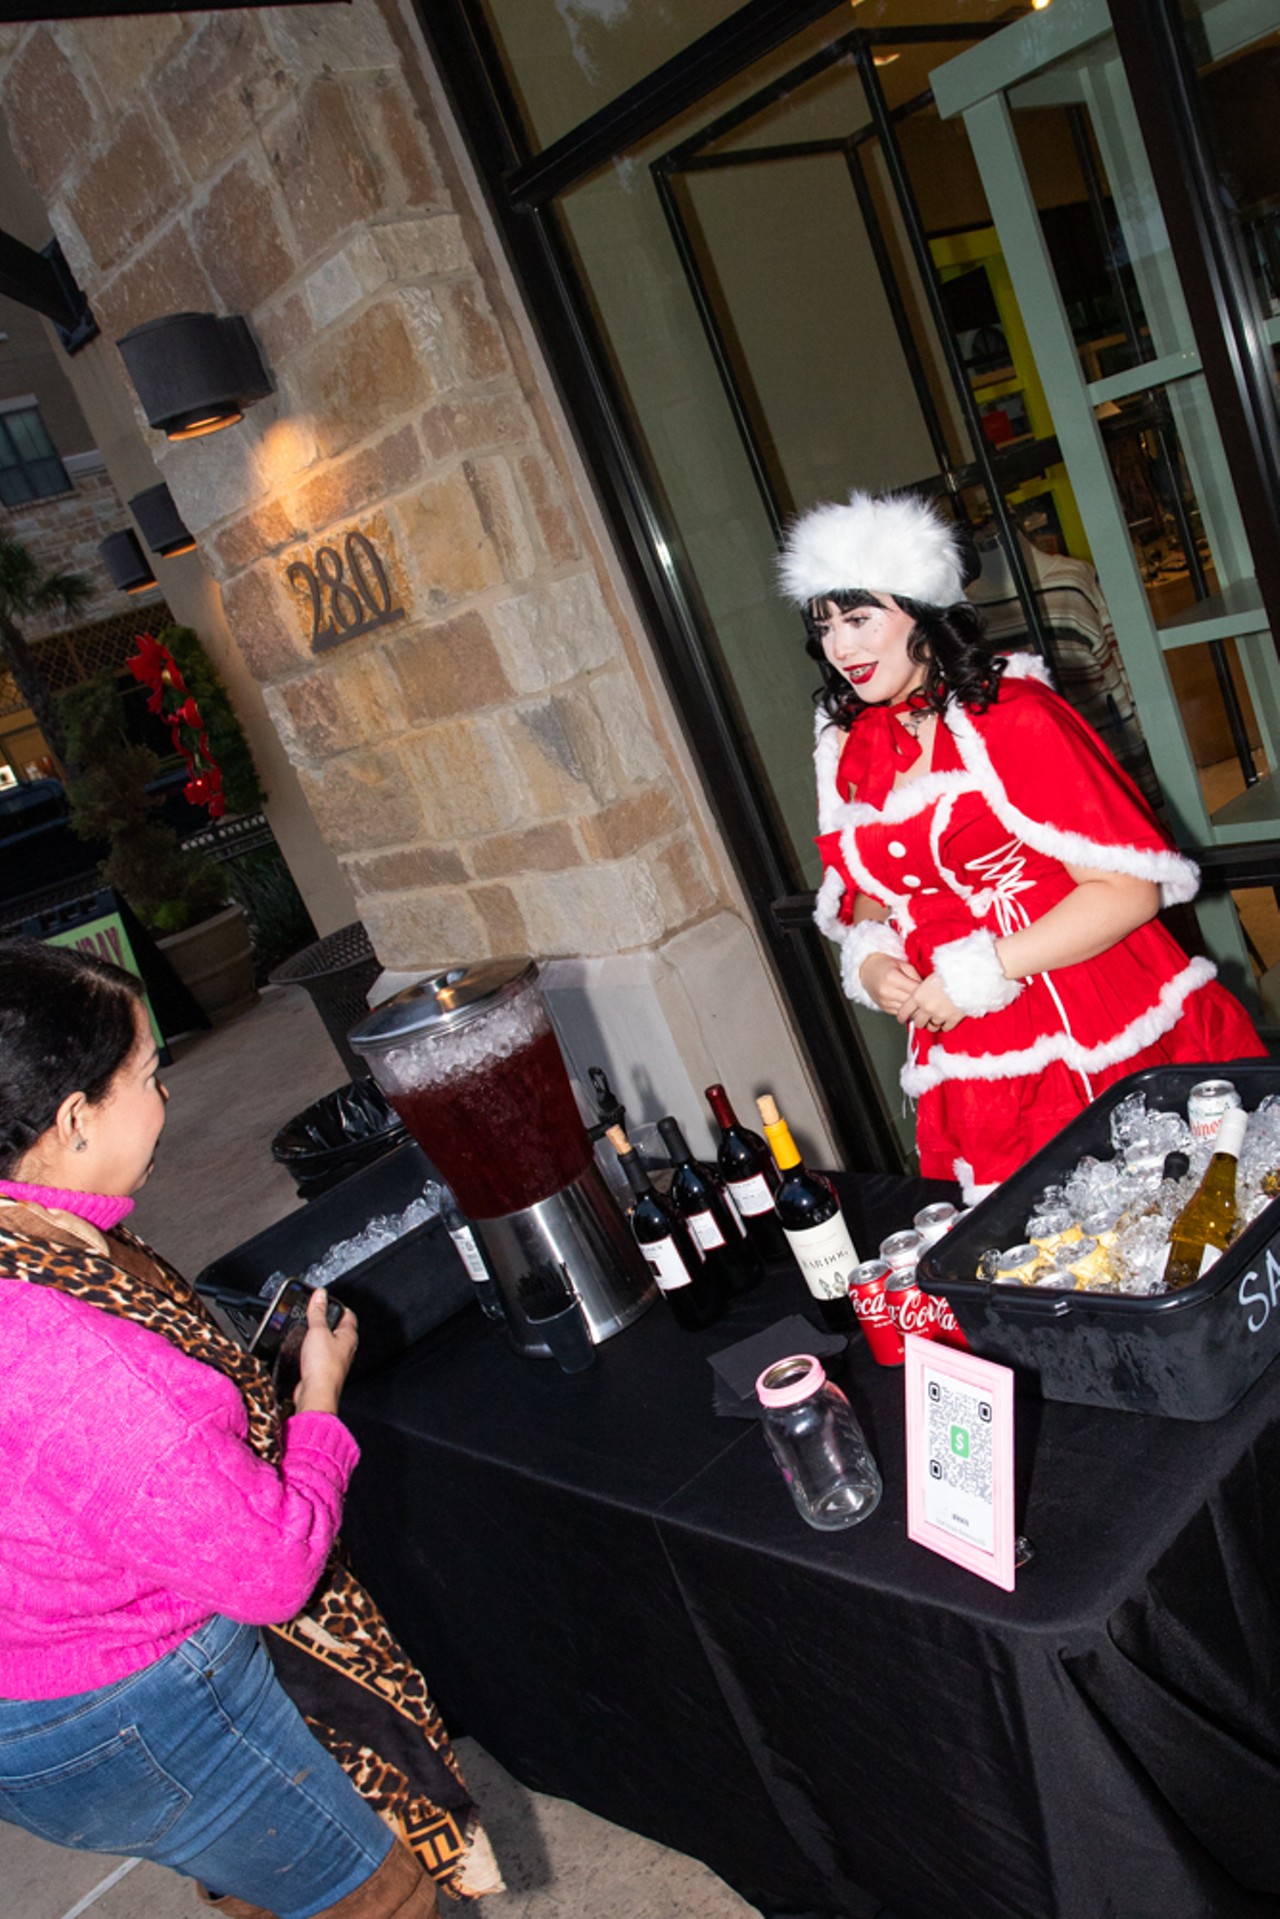 Cheerful moments from the 7th Annual Quarry Village Holiday Block Party